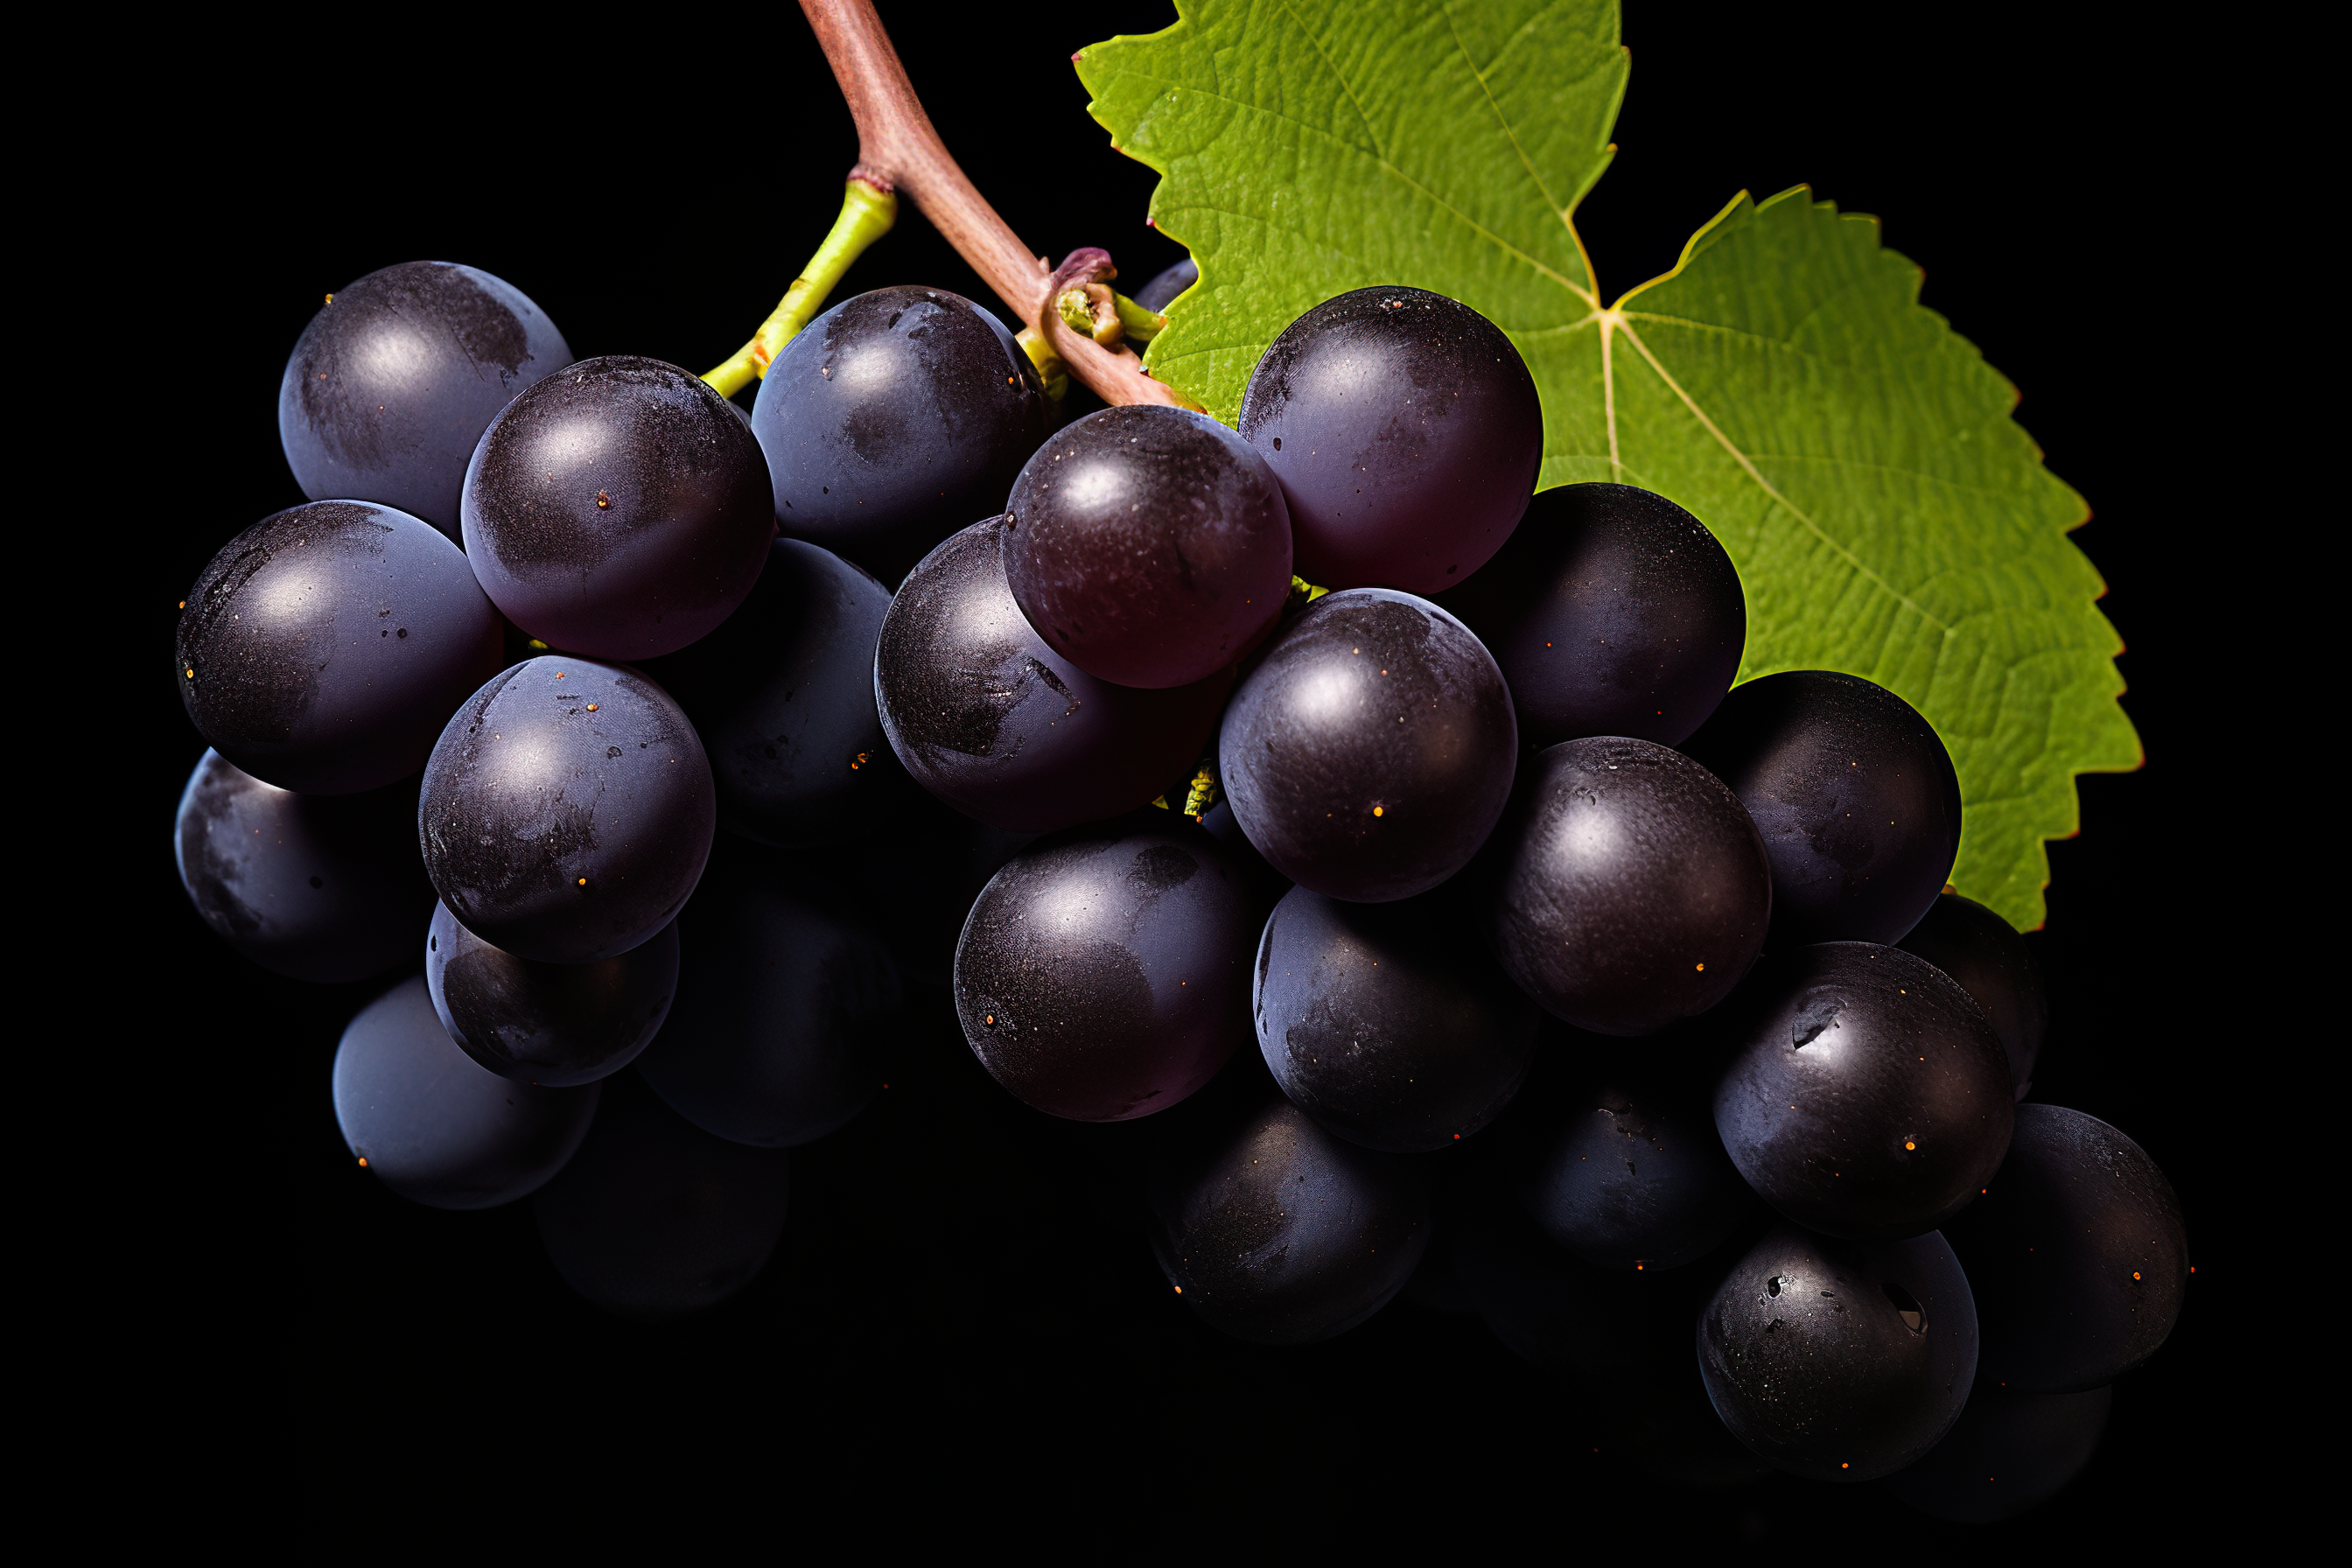 Purple grapes with green leaves, isolated on dark background